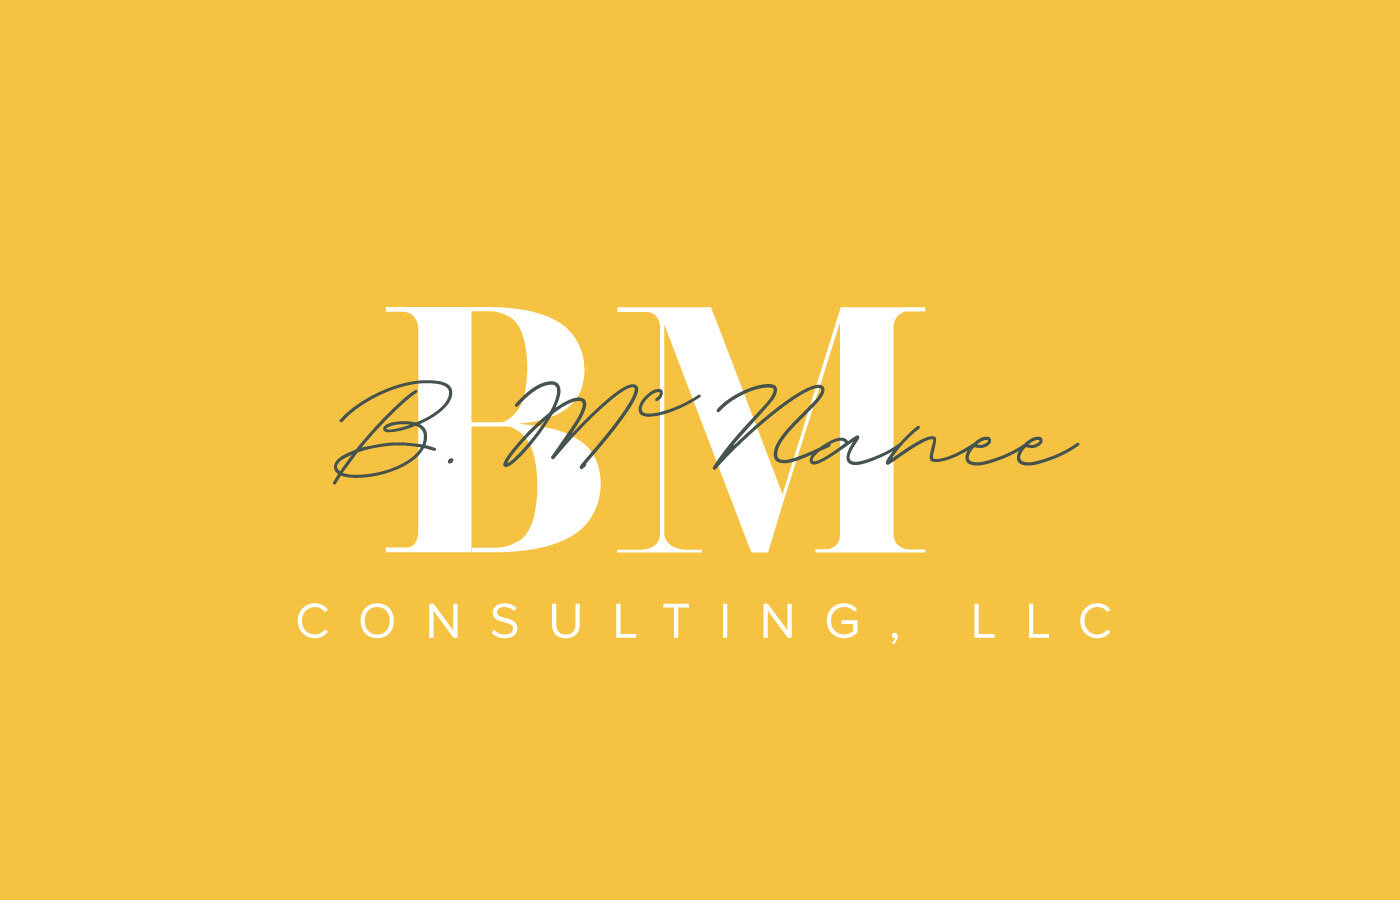 B. McNamee Consulting